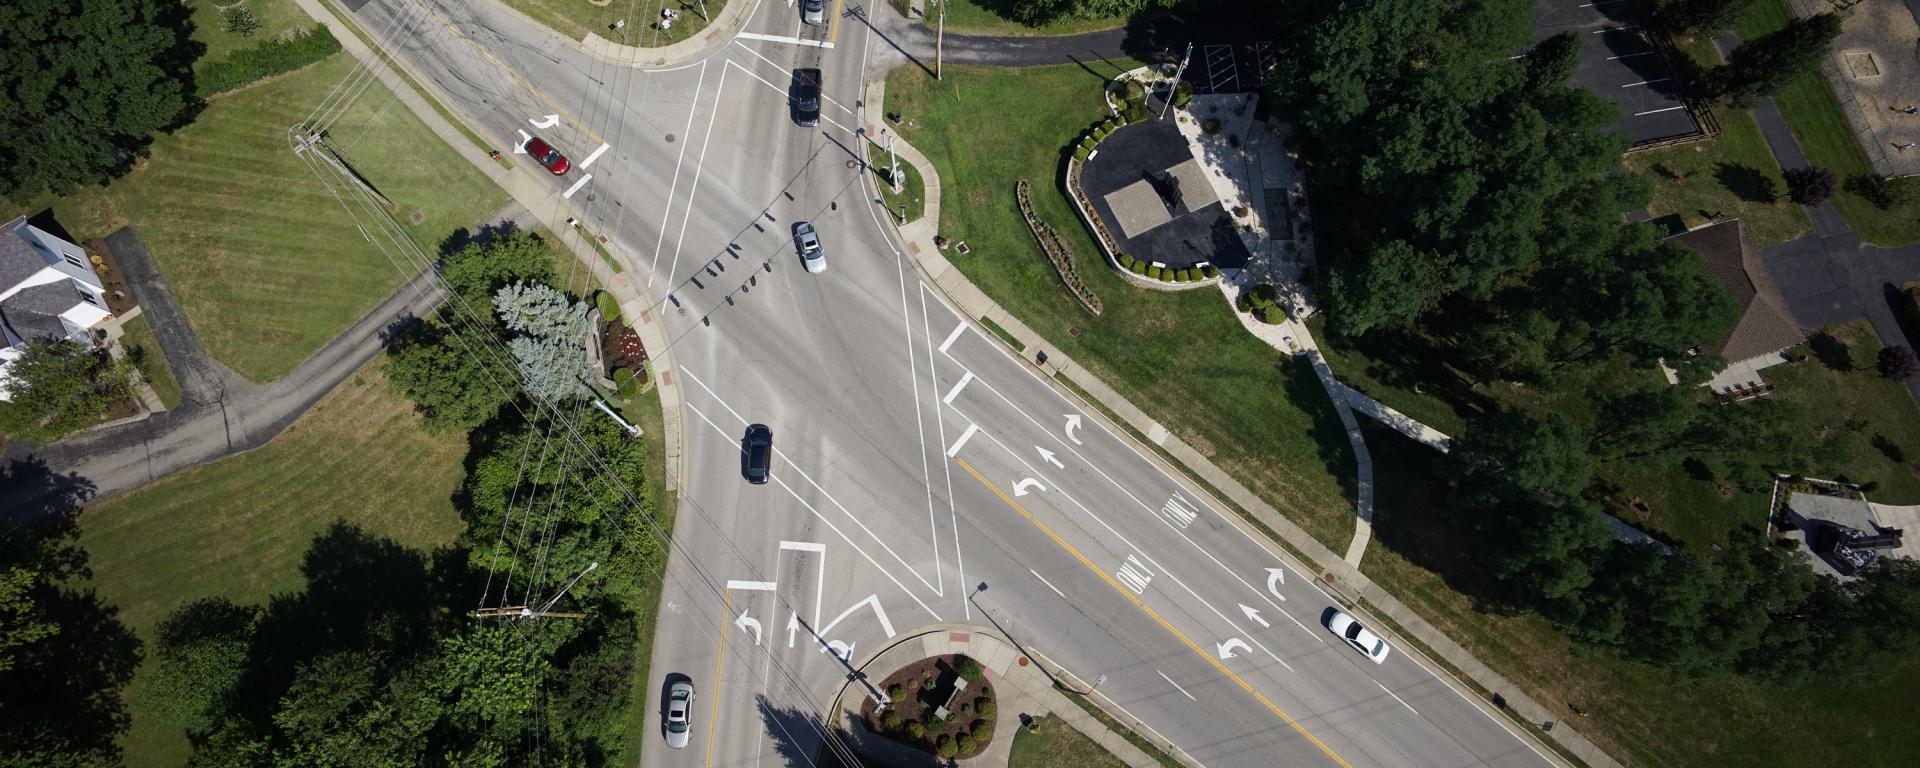 aerial photo of a roadway intersection with traffic striping on turn lanes